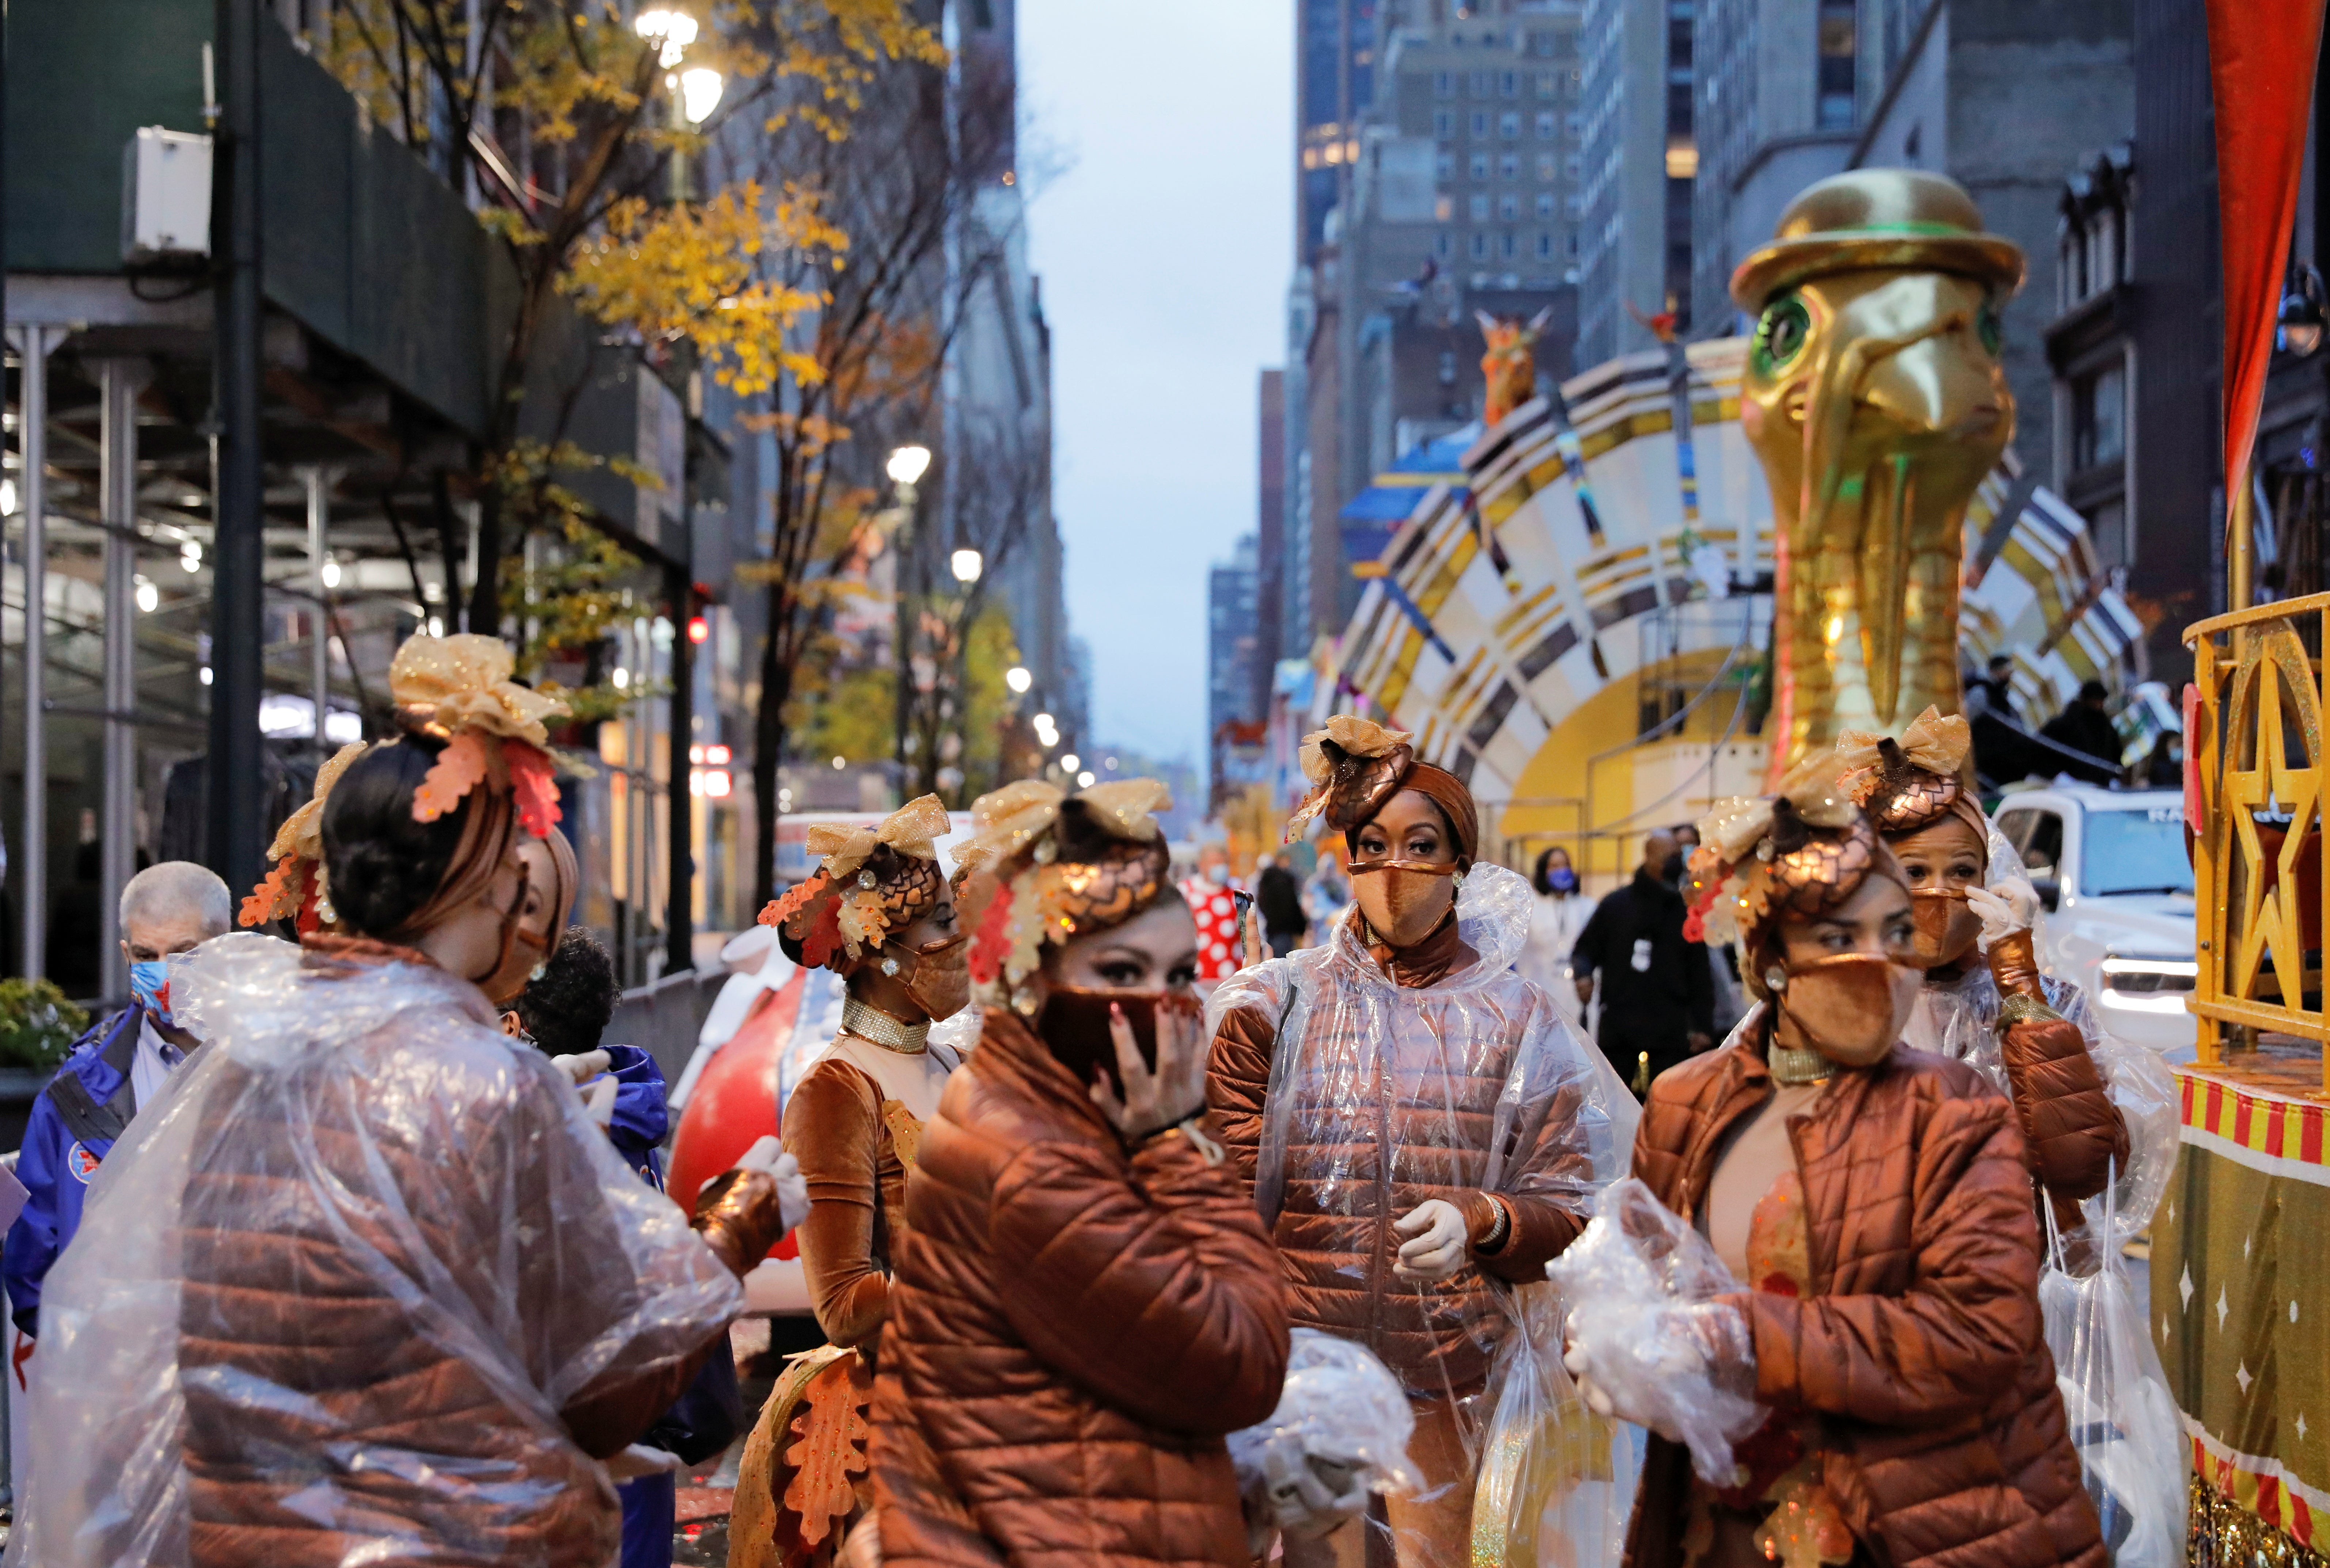 Participants gather ahead of the 94th Macy's Thanksgiving Day Parade